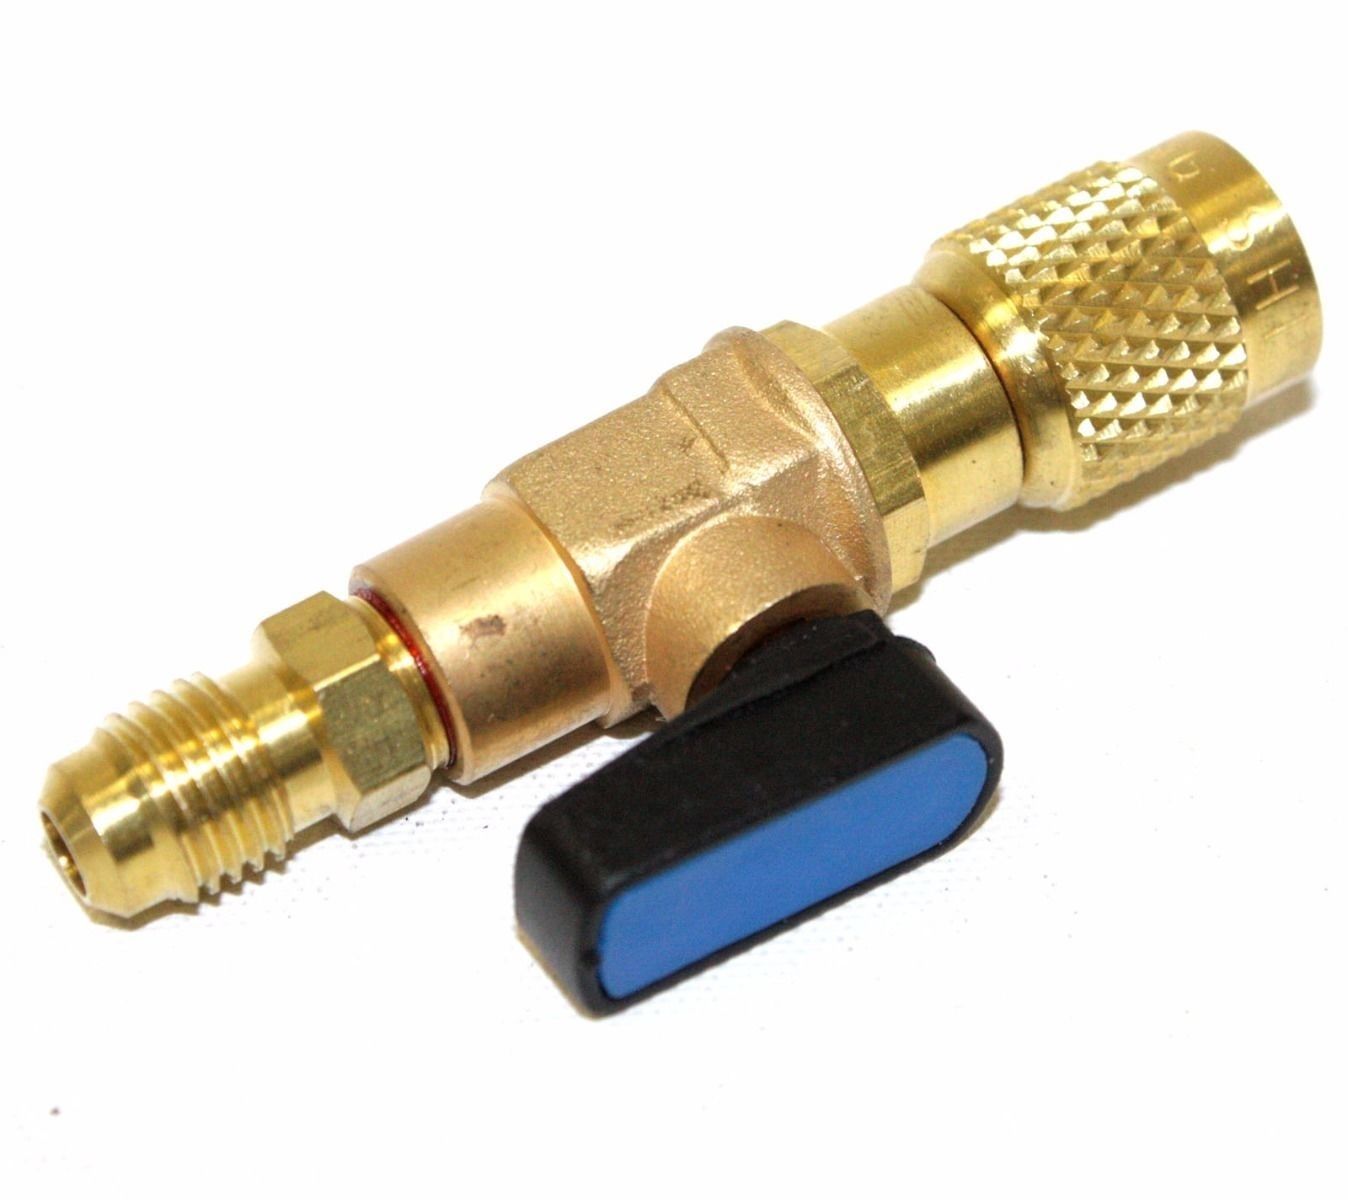 Details about   US HVAC A/C Straight SHUT-OFF Ball Valve Adapter Fit For R410a R134a 1/4" 